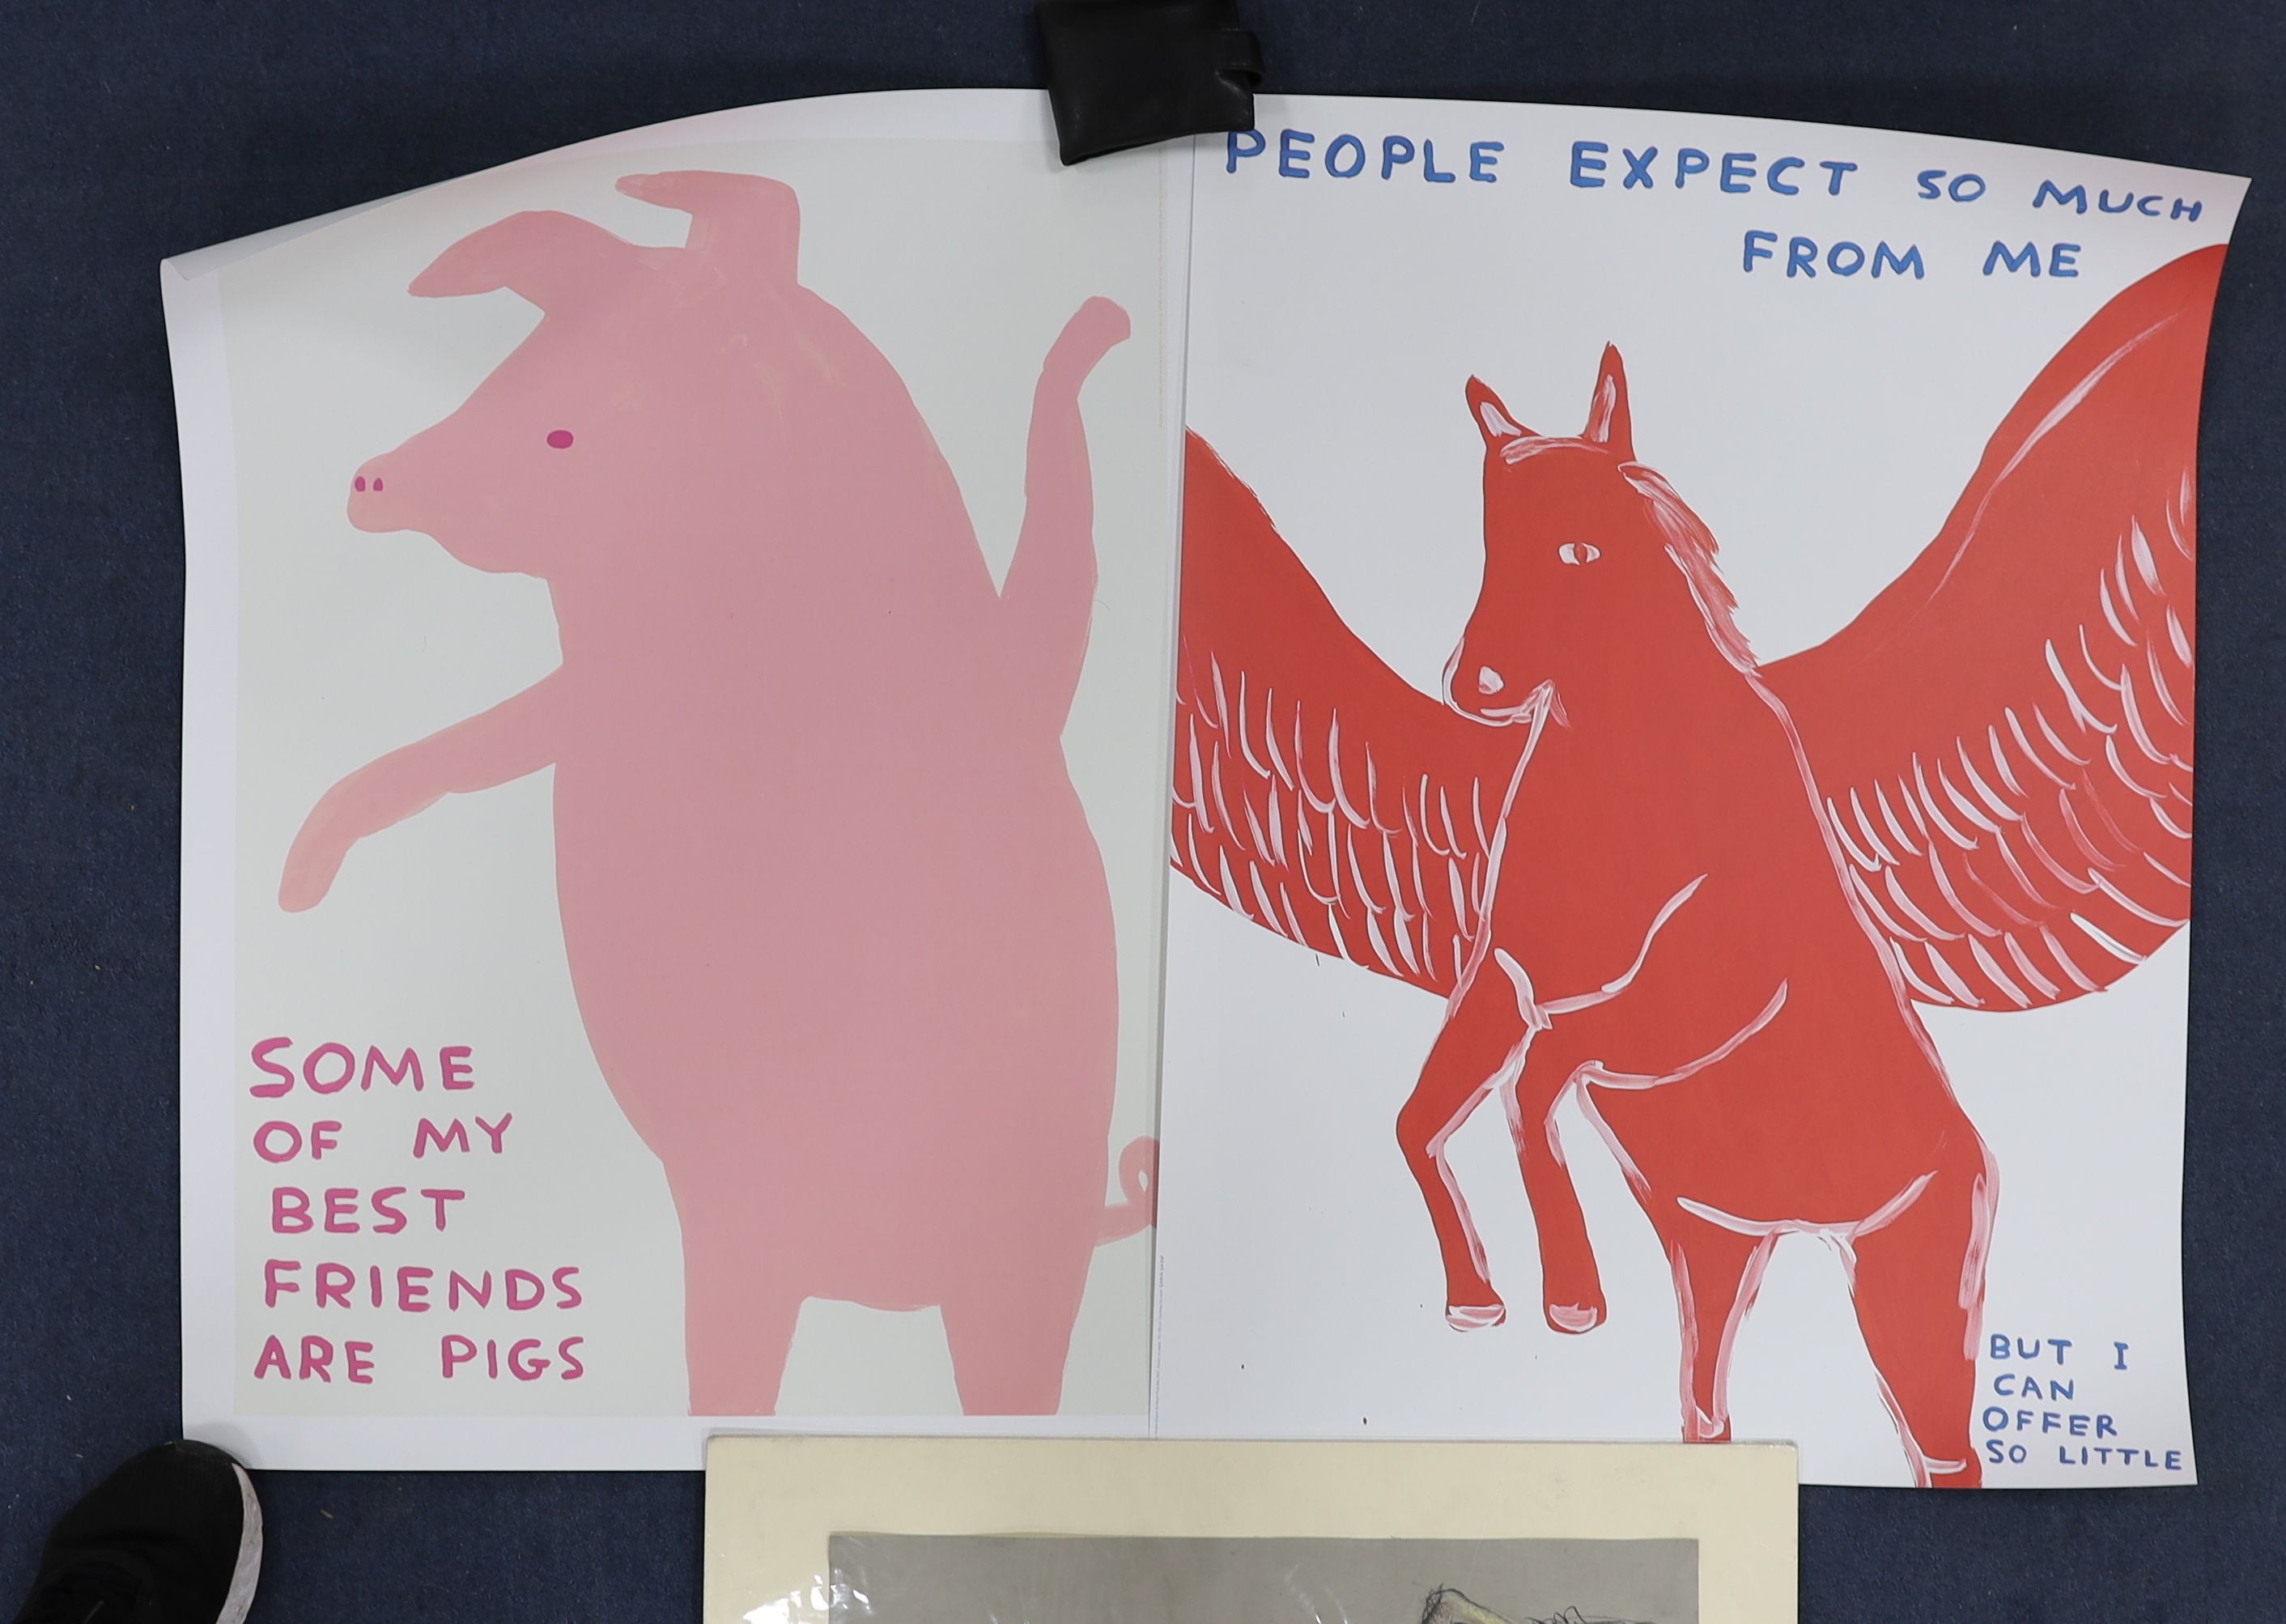 David Shrigley (1968-), two colour prints, 'People expect so much from me' and 'Some of my best friends are pigs', 80 x 60cm